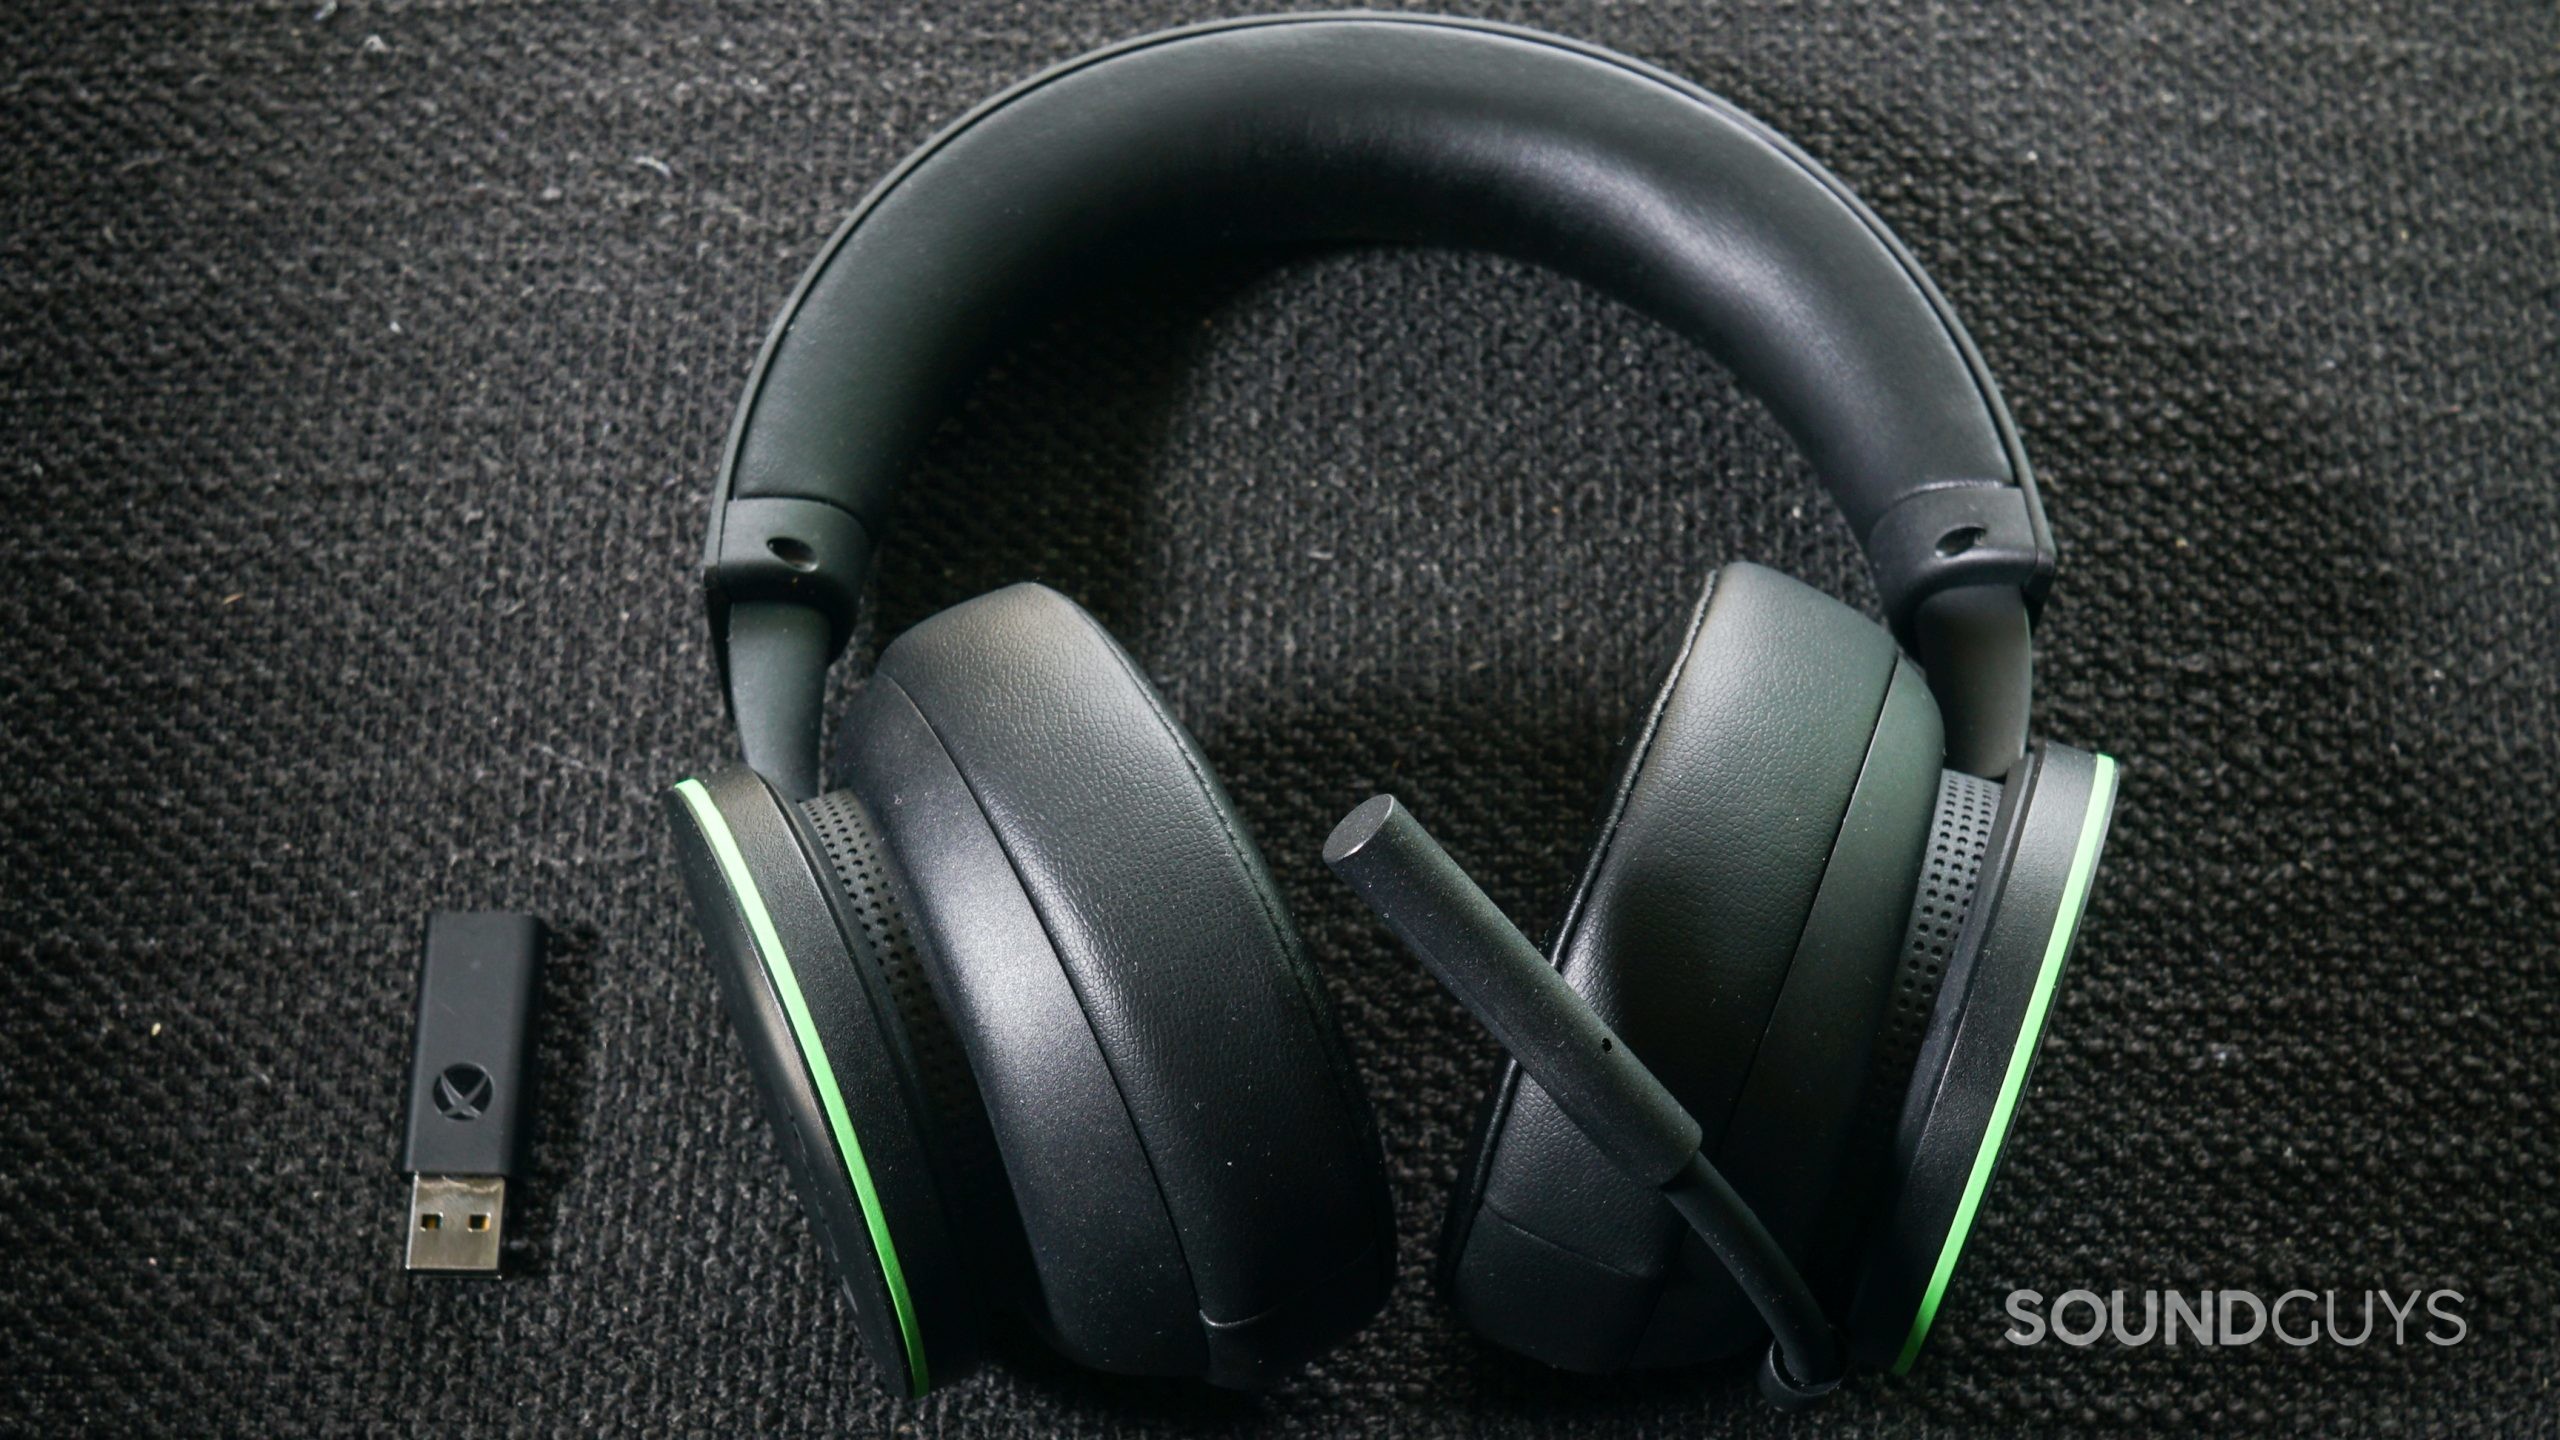 The Microsoft Xbox Wireless Headset lays on a fabric surface next to the Windows Xbox Wireless Adapter.